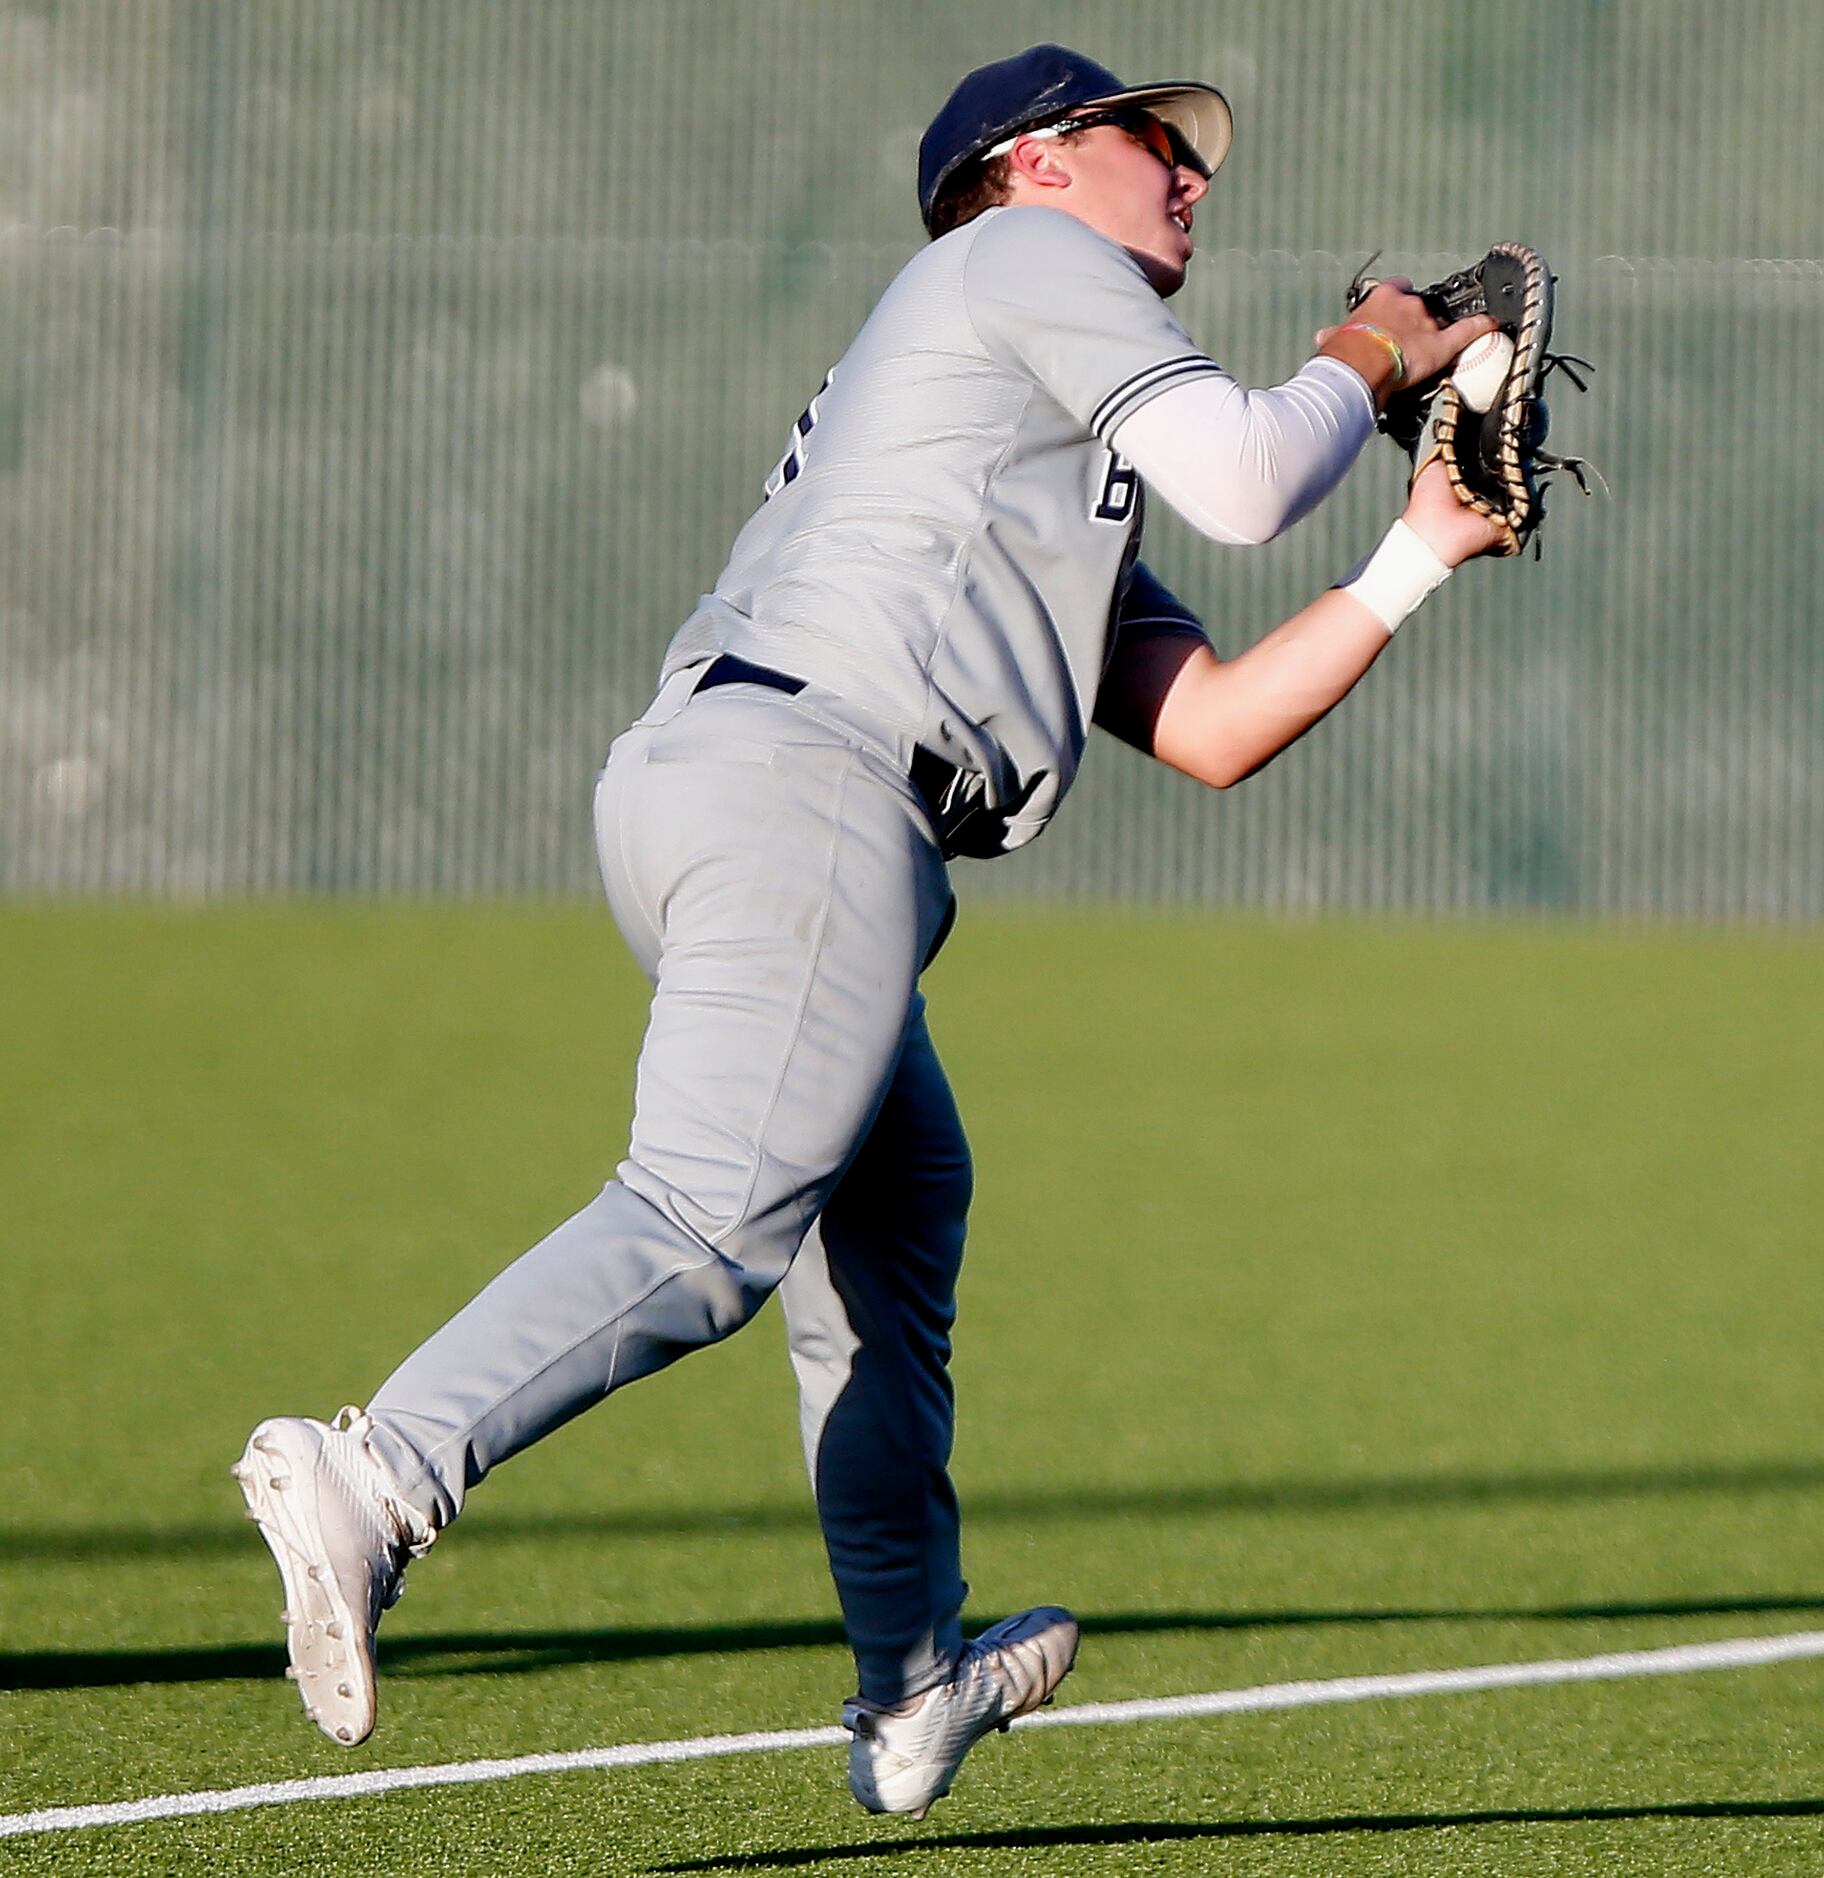 McKinney North High School Dylan Stowe (11) catches a pop up in foul territory to retire the...